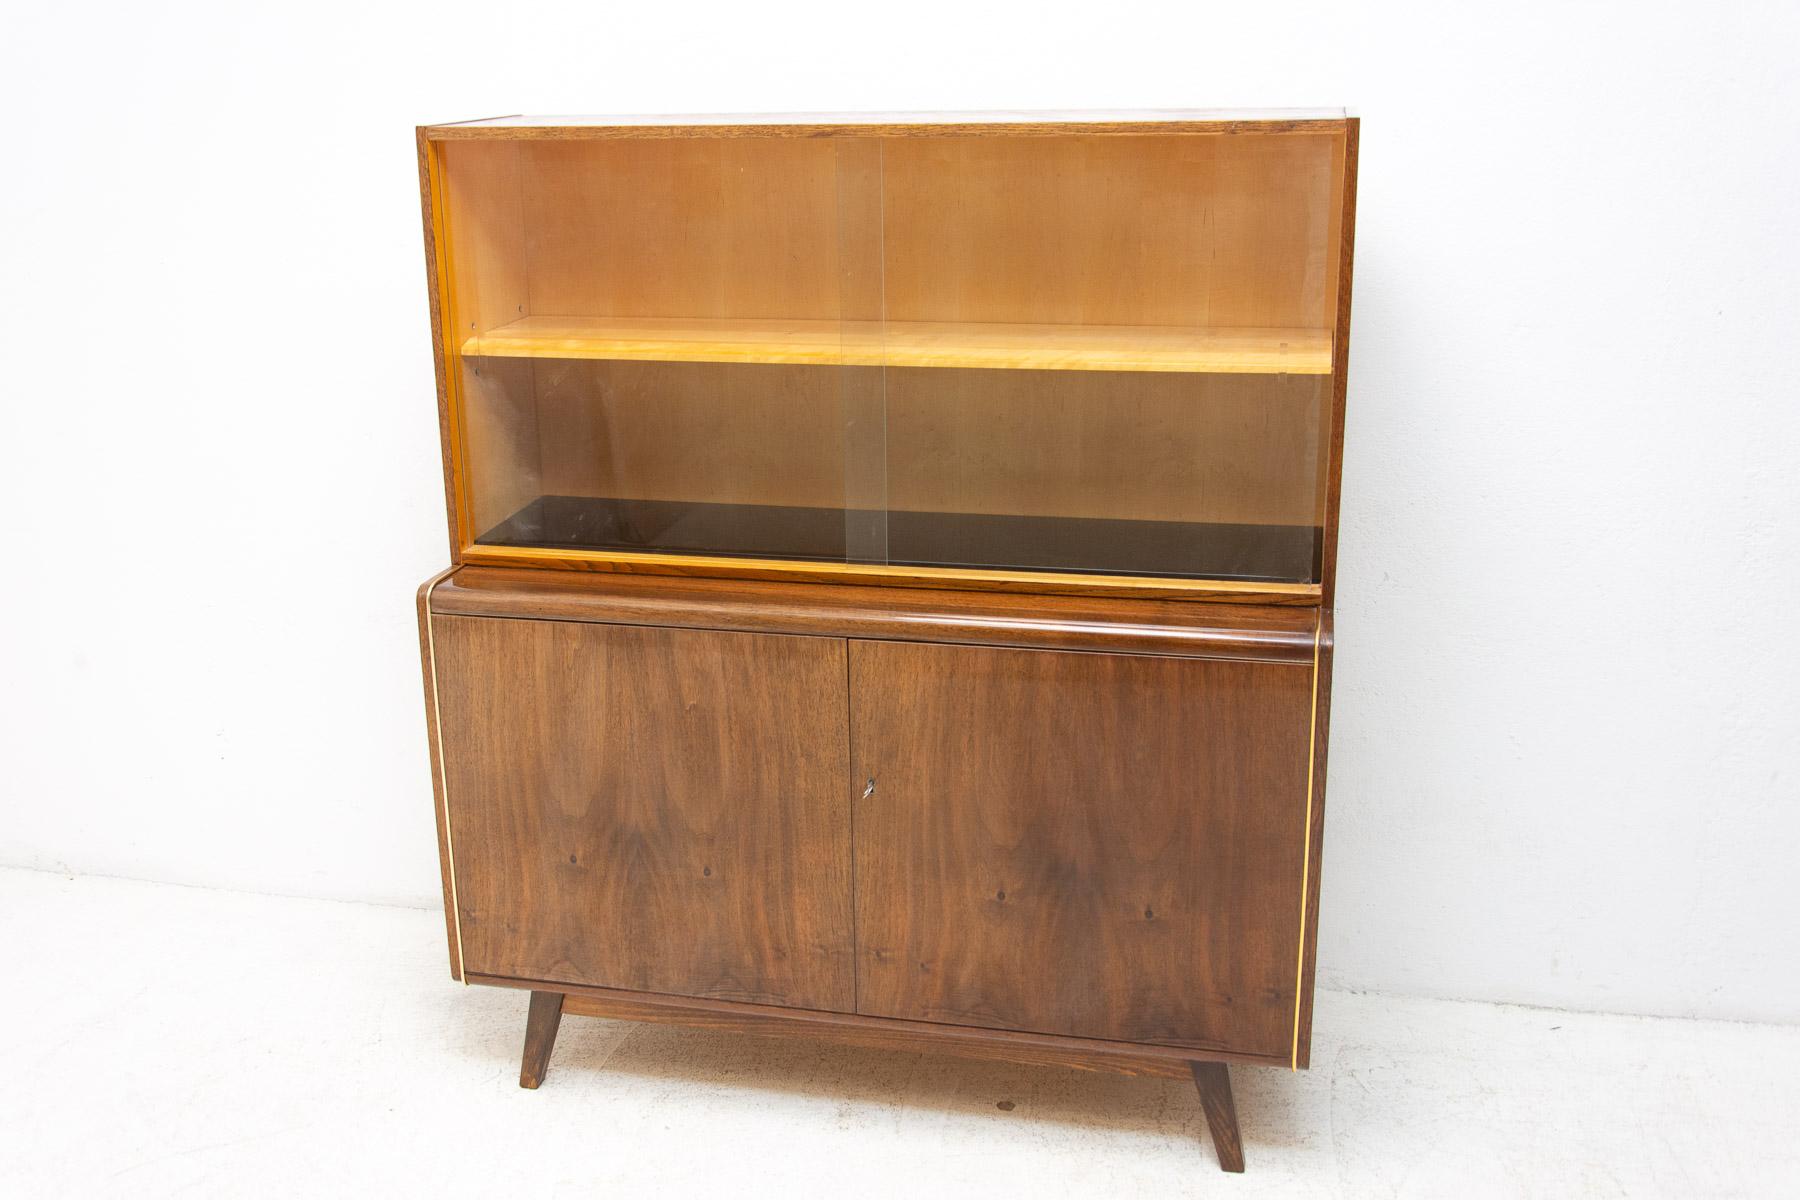 Mid century Vintage bookcase from the 1960´s. It was designed by Hubert Nepožitek & Bohumil Landsman for Jitona in the former Czechoslovakia. Features a simple design, a glazed section with a storage spaces. Nice walnut veneer. In very good Vintage